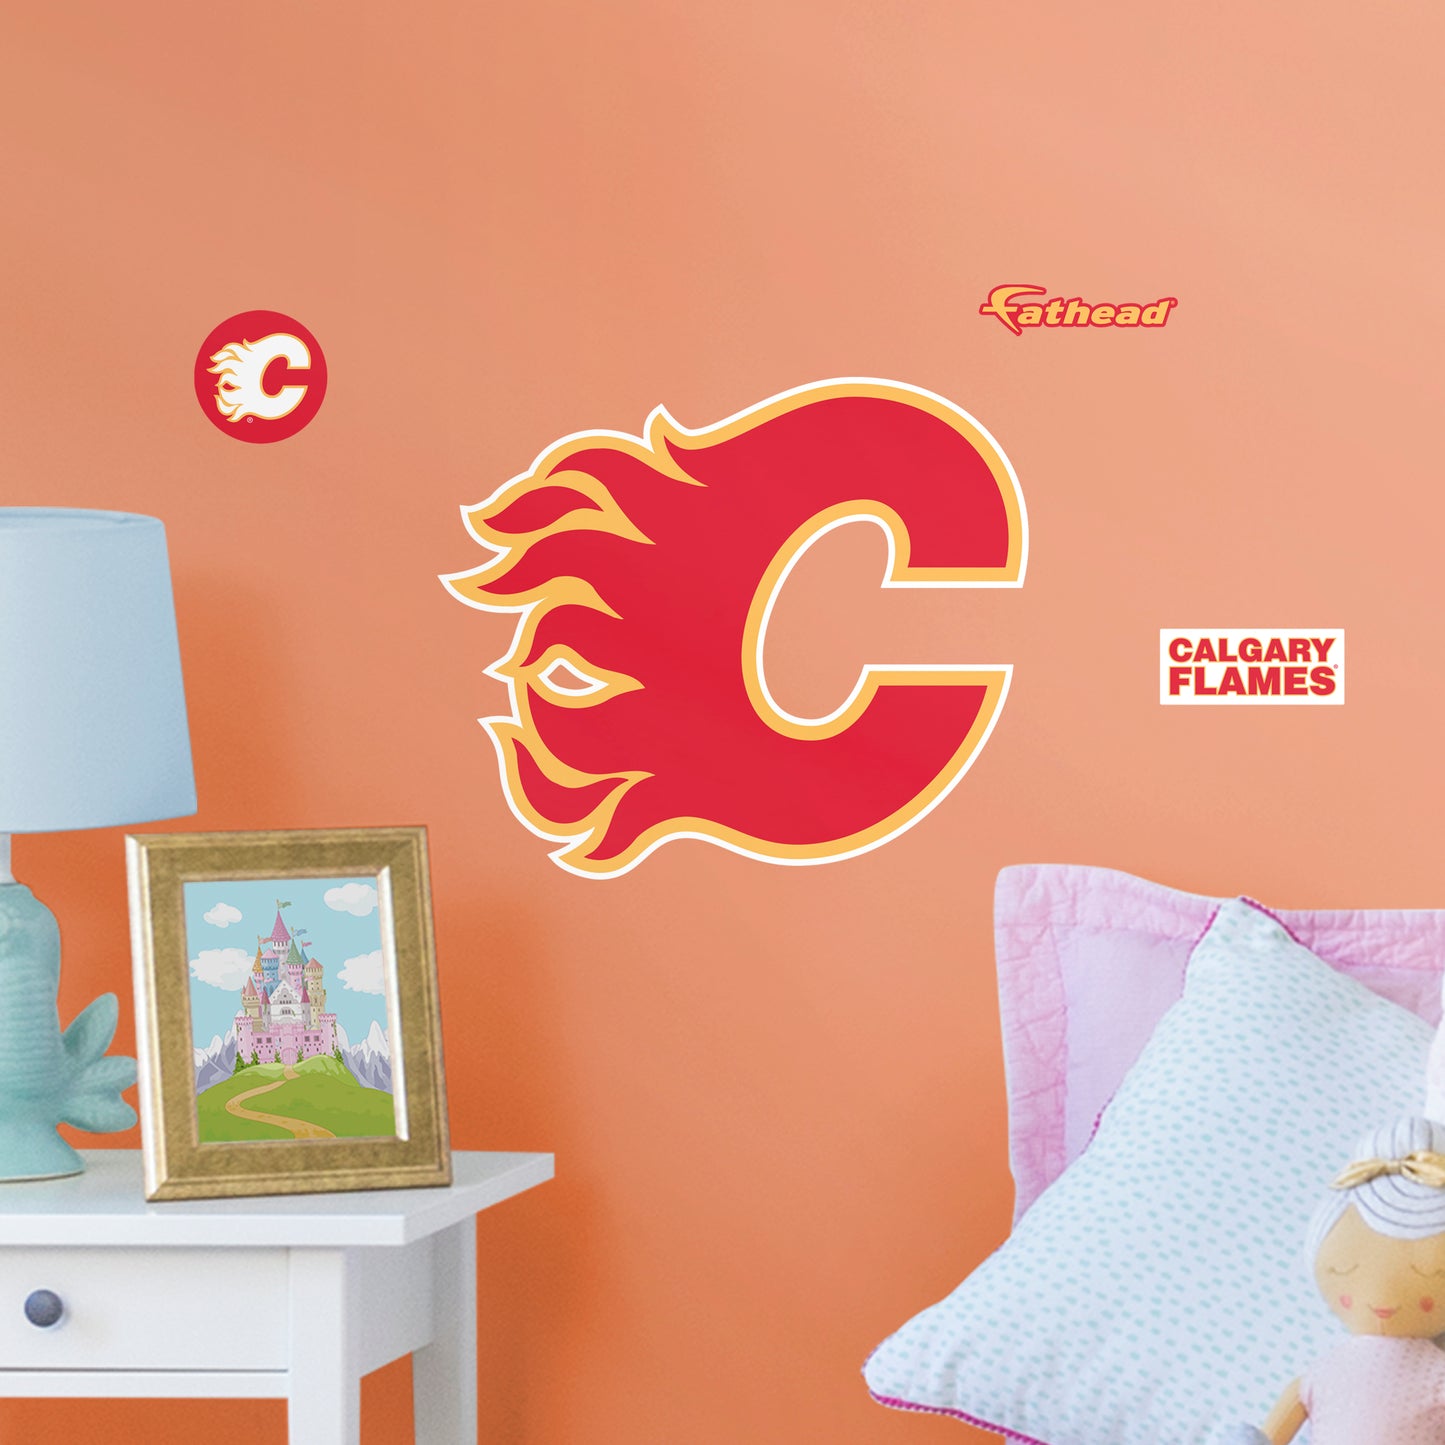 Calgary Flames 2020 POD Teammate Logo  - Officially Licensed NHL Removable Wall Decal